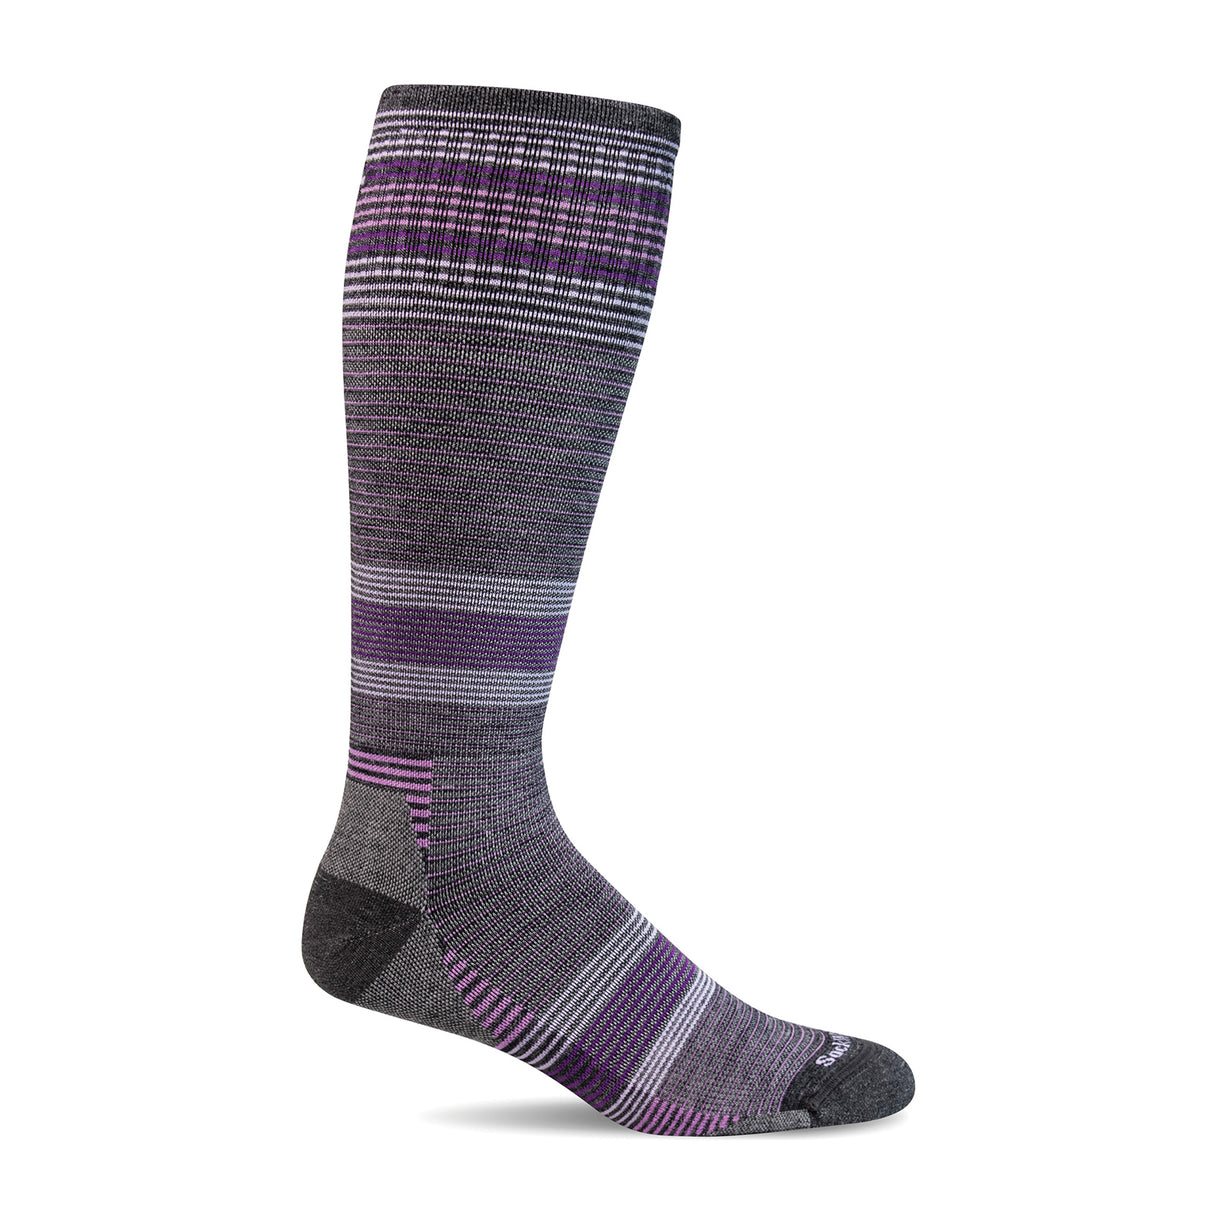 Sockwell Cadence Over the Calf Compression Sock (Women) - Charcoal Accessories - Socks - Compression - The Heel Shoe Fitters